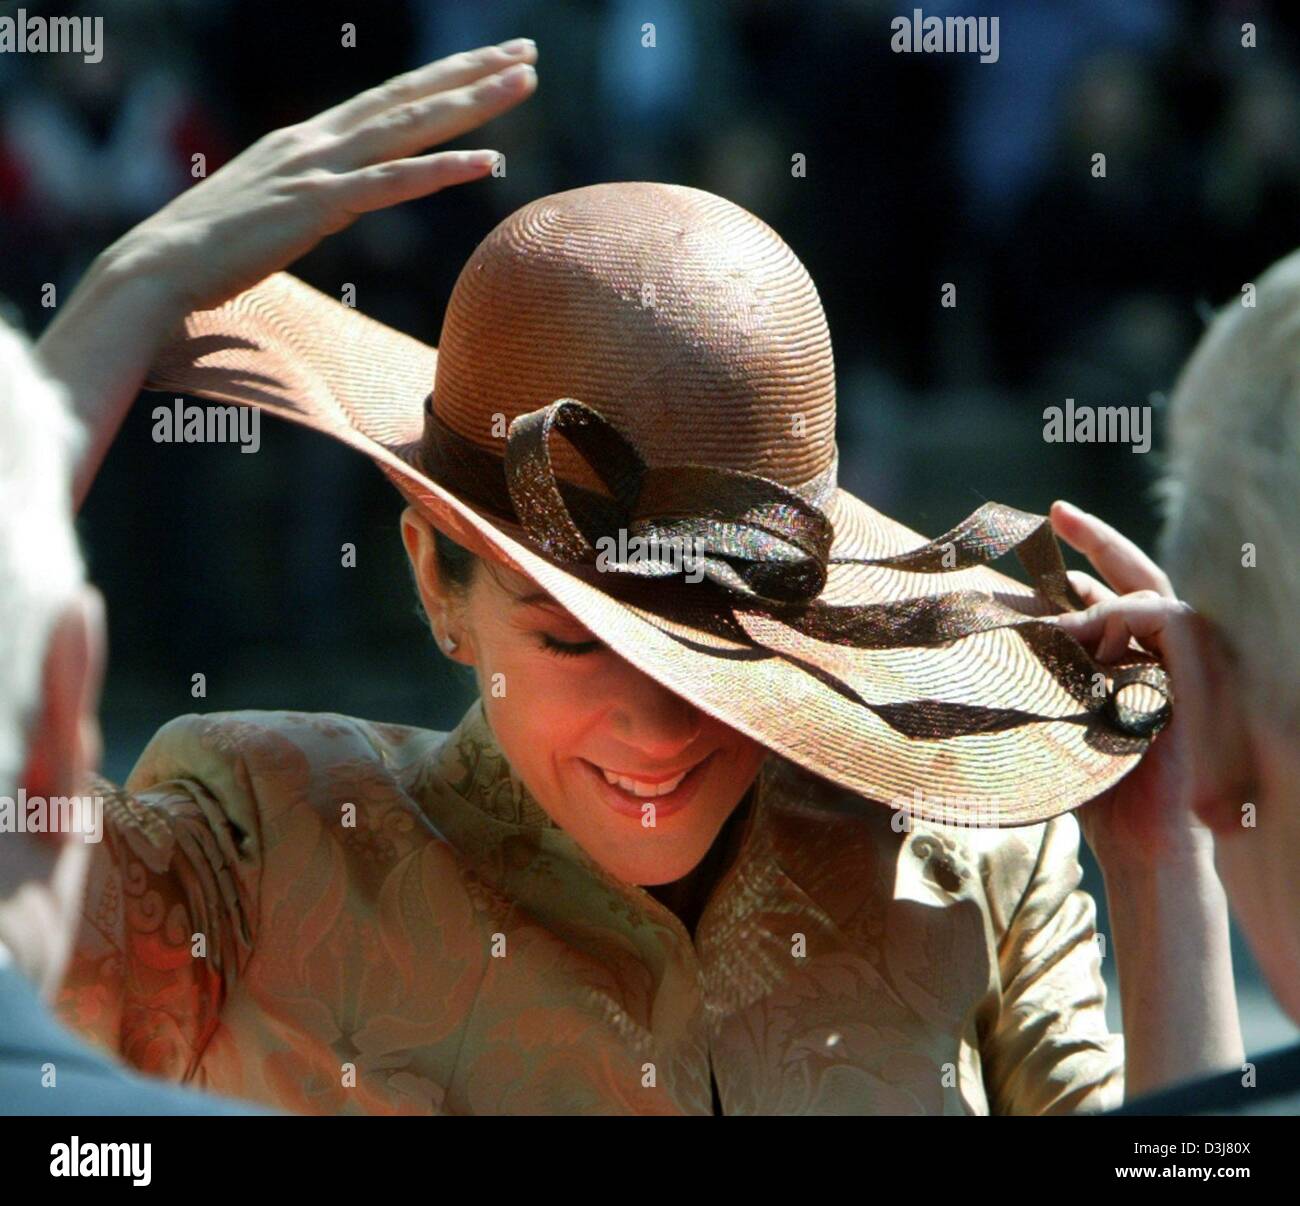 (dpa) - Mary Donaldson, the Australian fiancee of Crown Prince Frederik of Denmark, holds on to her hat which had been blown off her head during a visit of the Parliament in Copenhagen, Denmark, 13 May 2004. Donaldson will wed Crown Prince Frederik at the Cathedral in Copenhagen on Friday 14 May 2004. Stock Photo